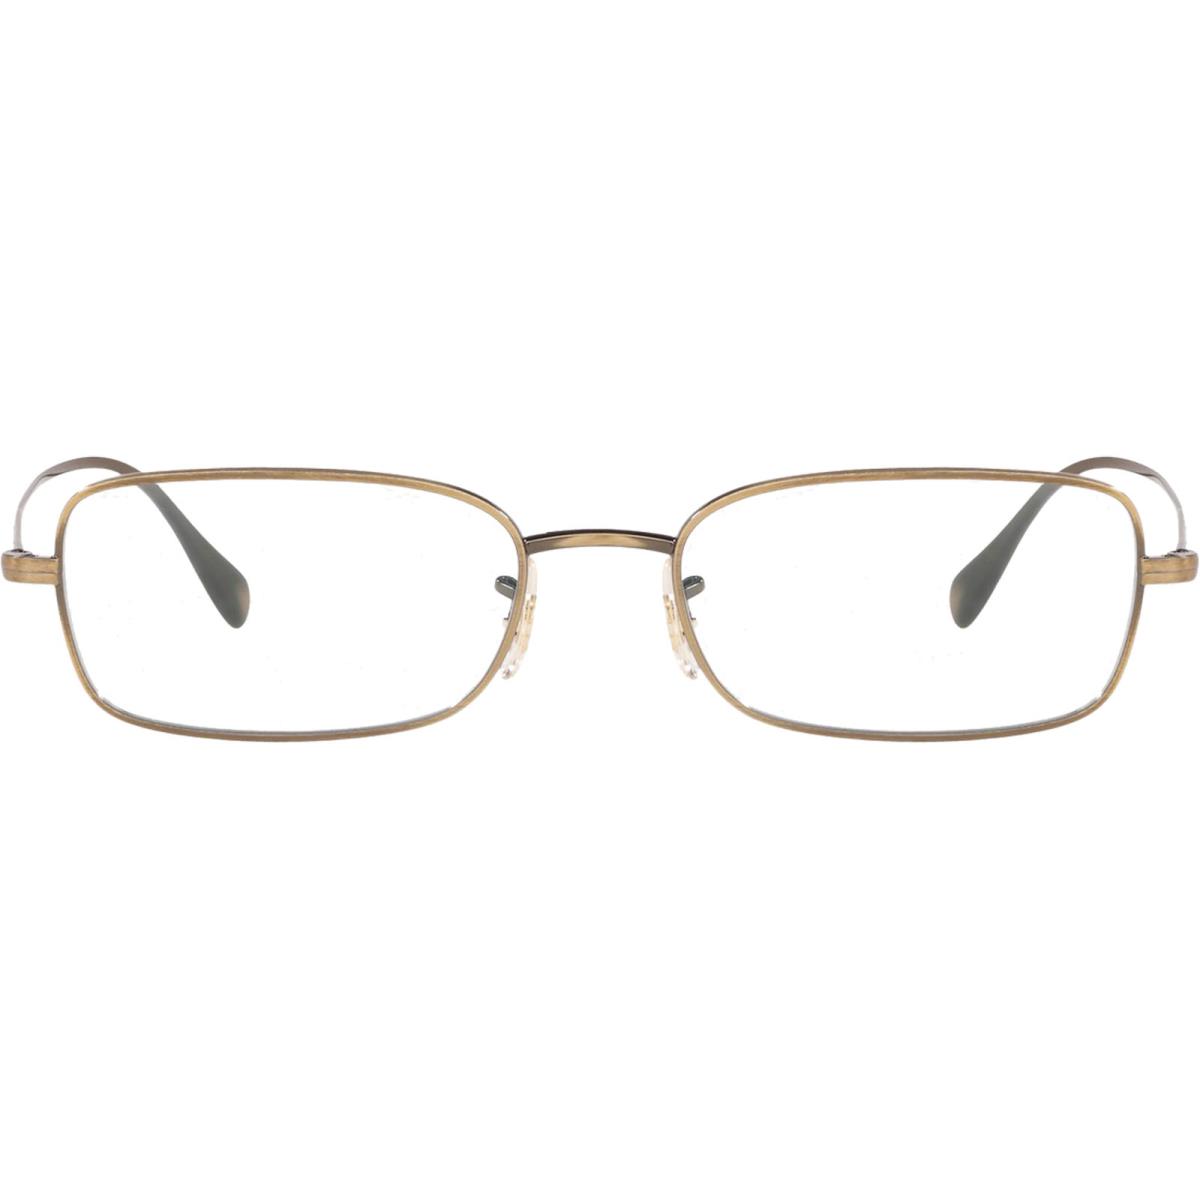 Oliver Peoples Aronson Antique Gold-tone Eyeglass Frames - OV1253 5284 - Italy - Frame: Antique Gold-Tone